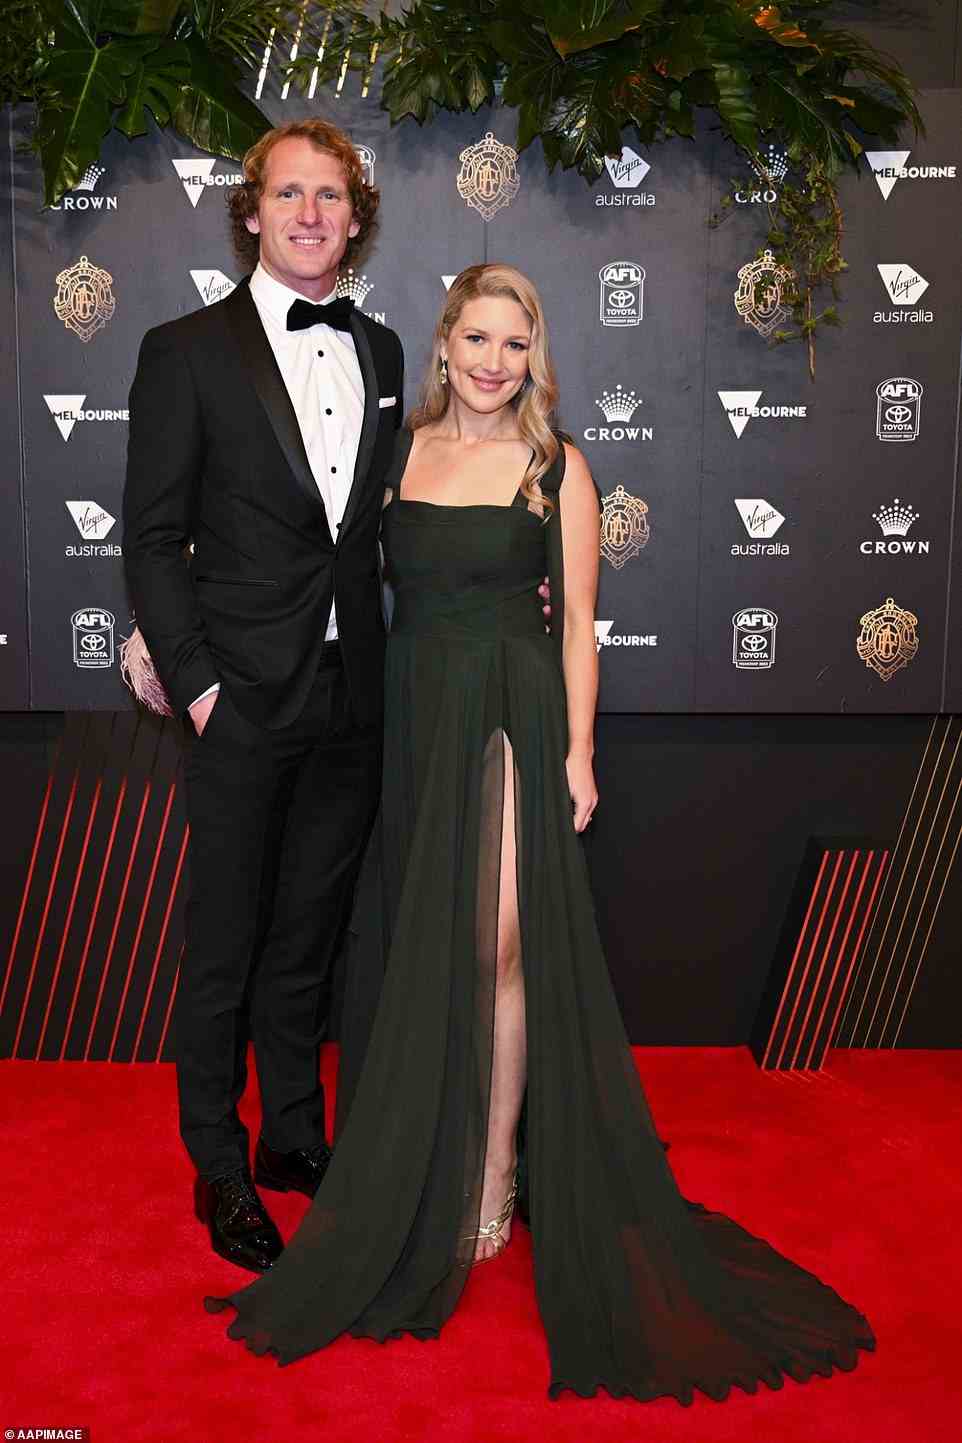 David Mundy of Fremantle Dockers with partner Sally Mundy looked handsome together, although Sally almost suffered a wardrobe malfunction when the split in her dress showed her bodysuit underneath